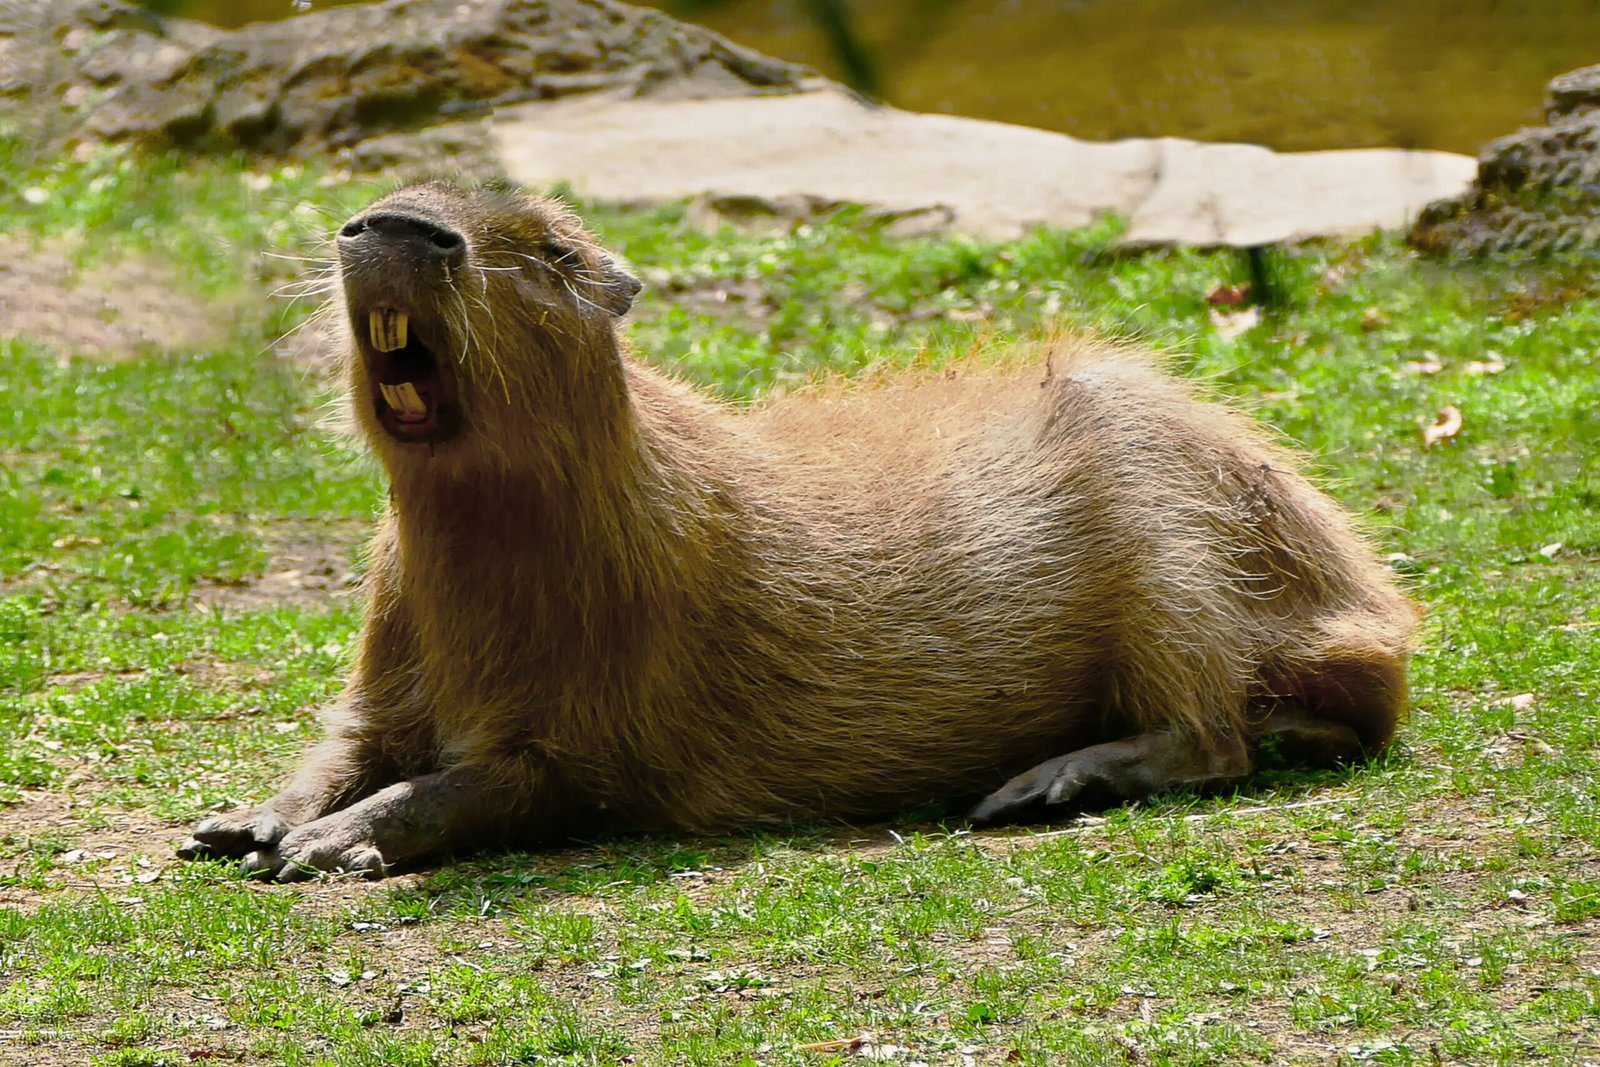 Capybara as a Pet in the UK: Rules and Regulations